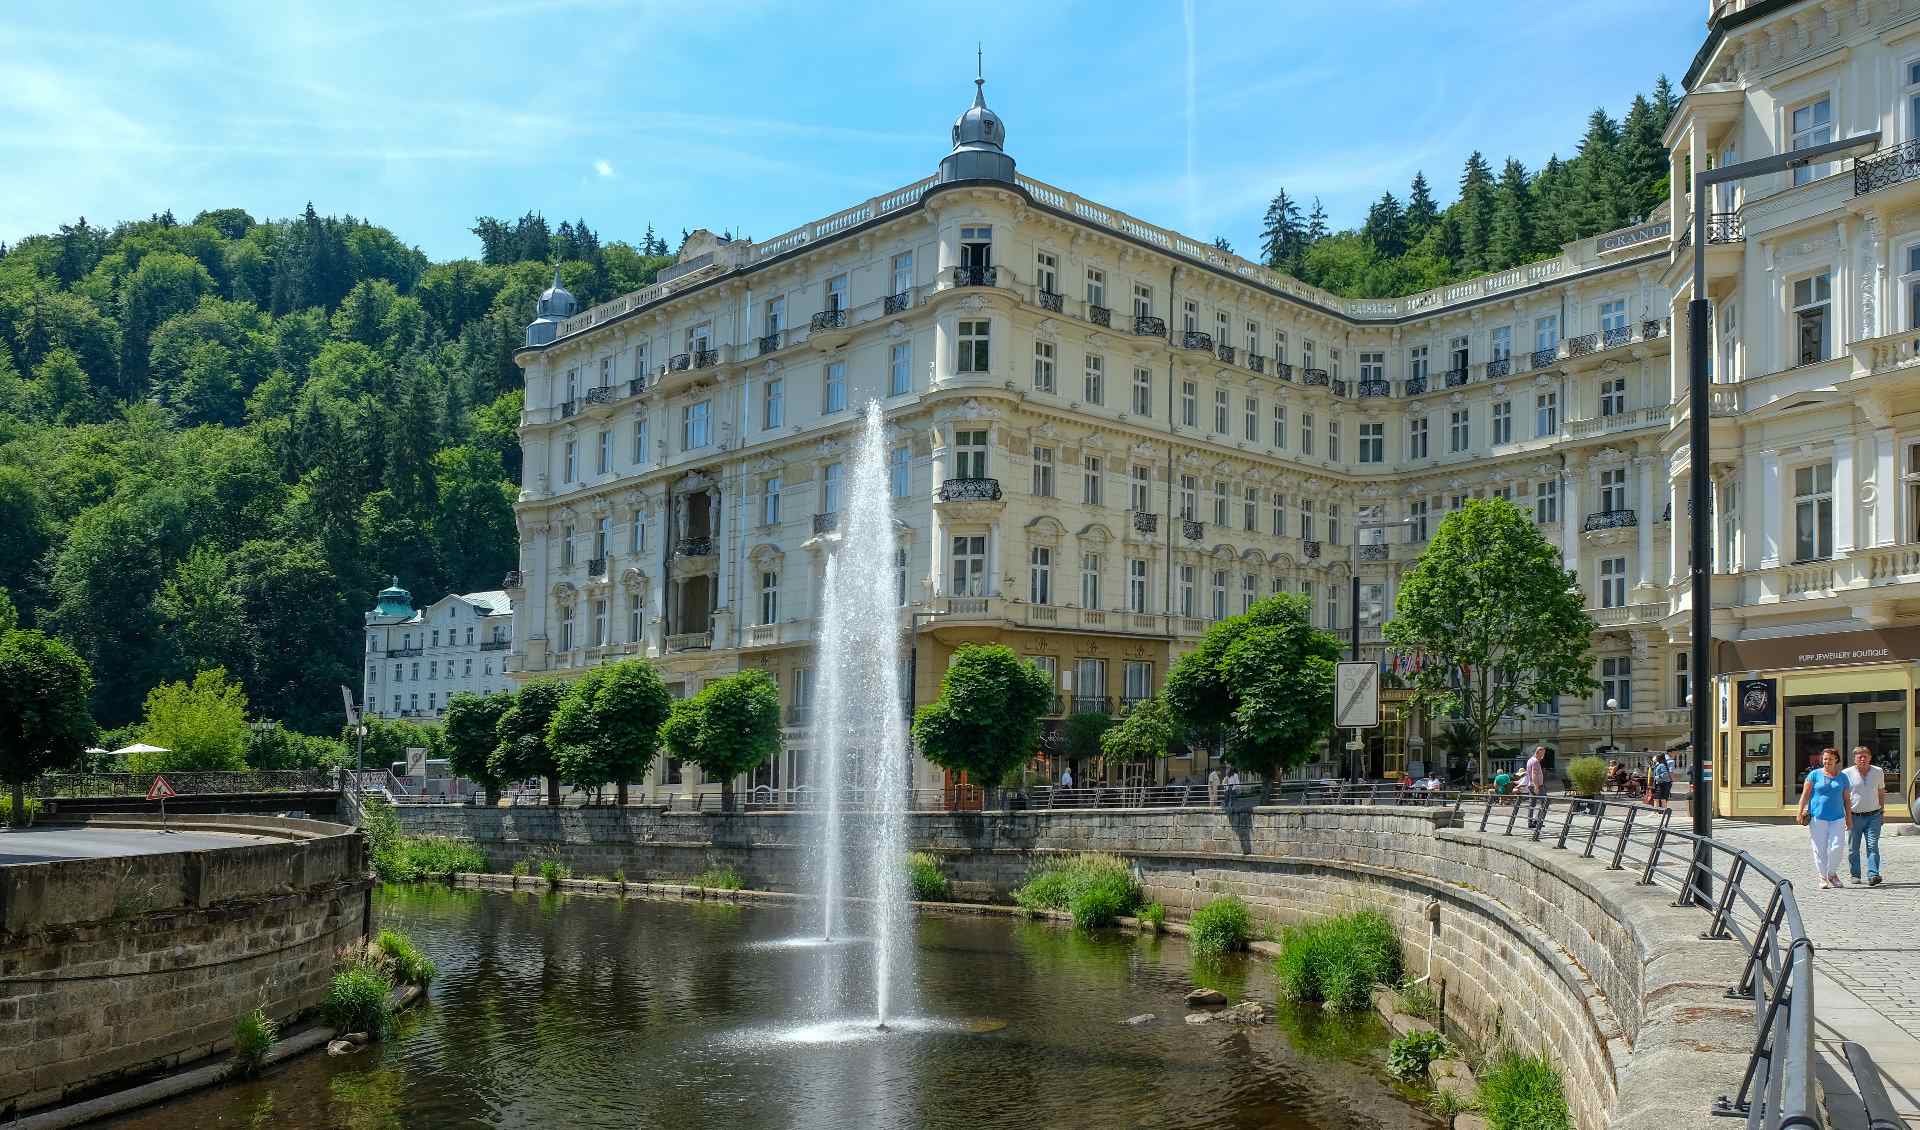 9 Interesting Facts about Karlovy Vary